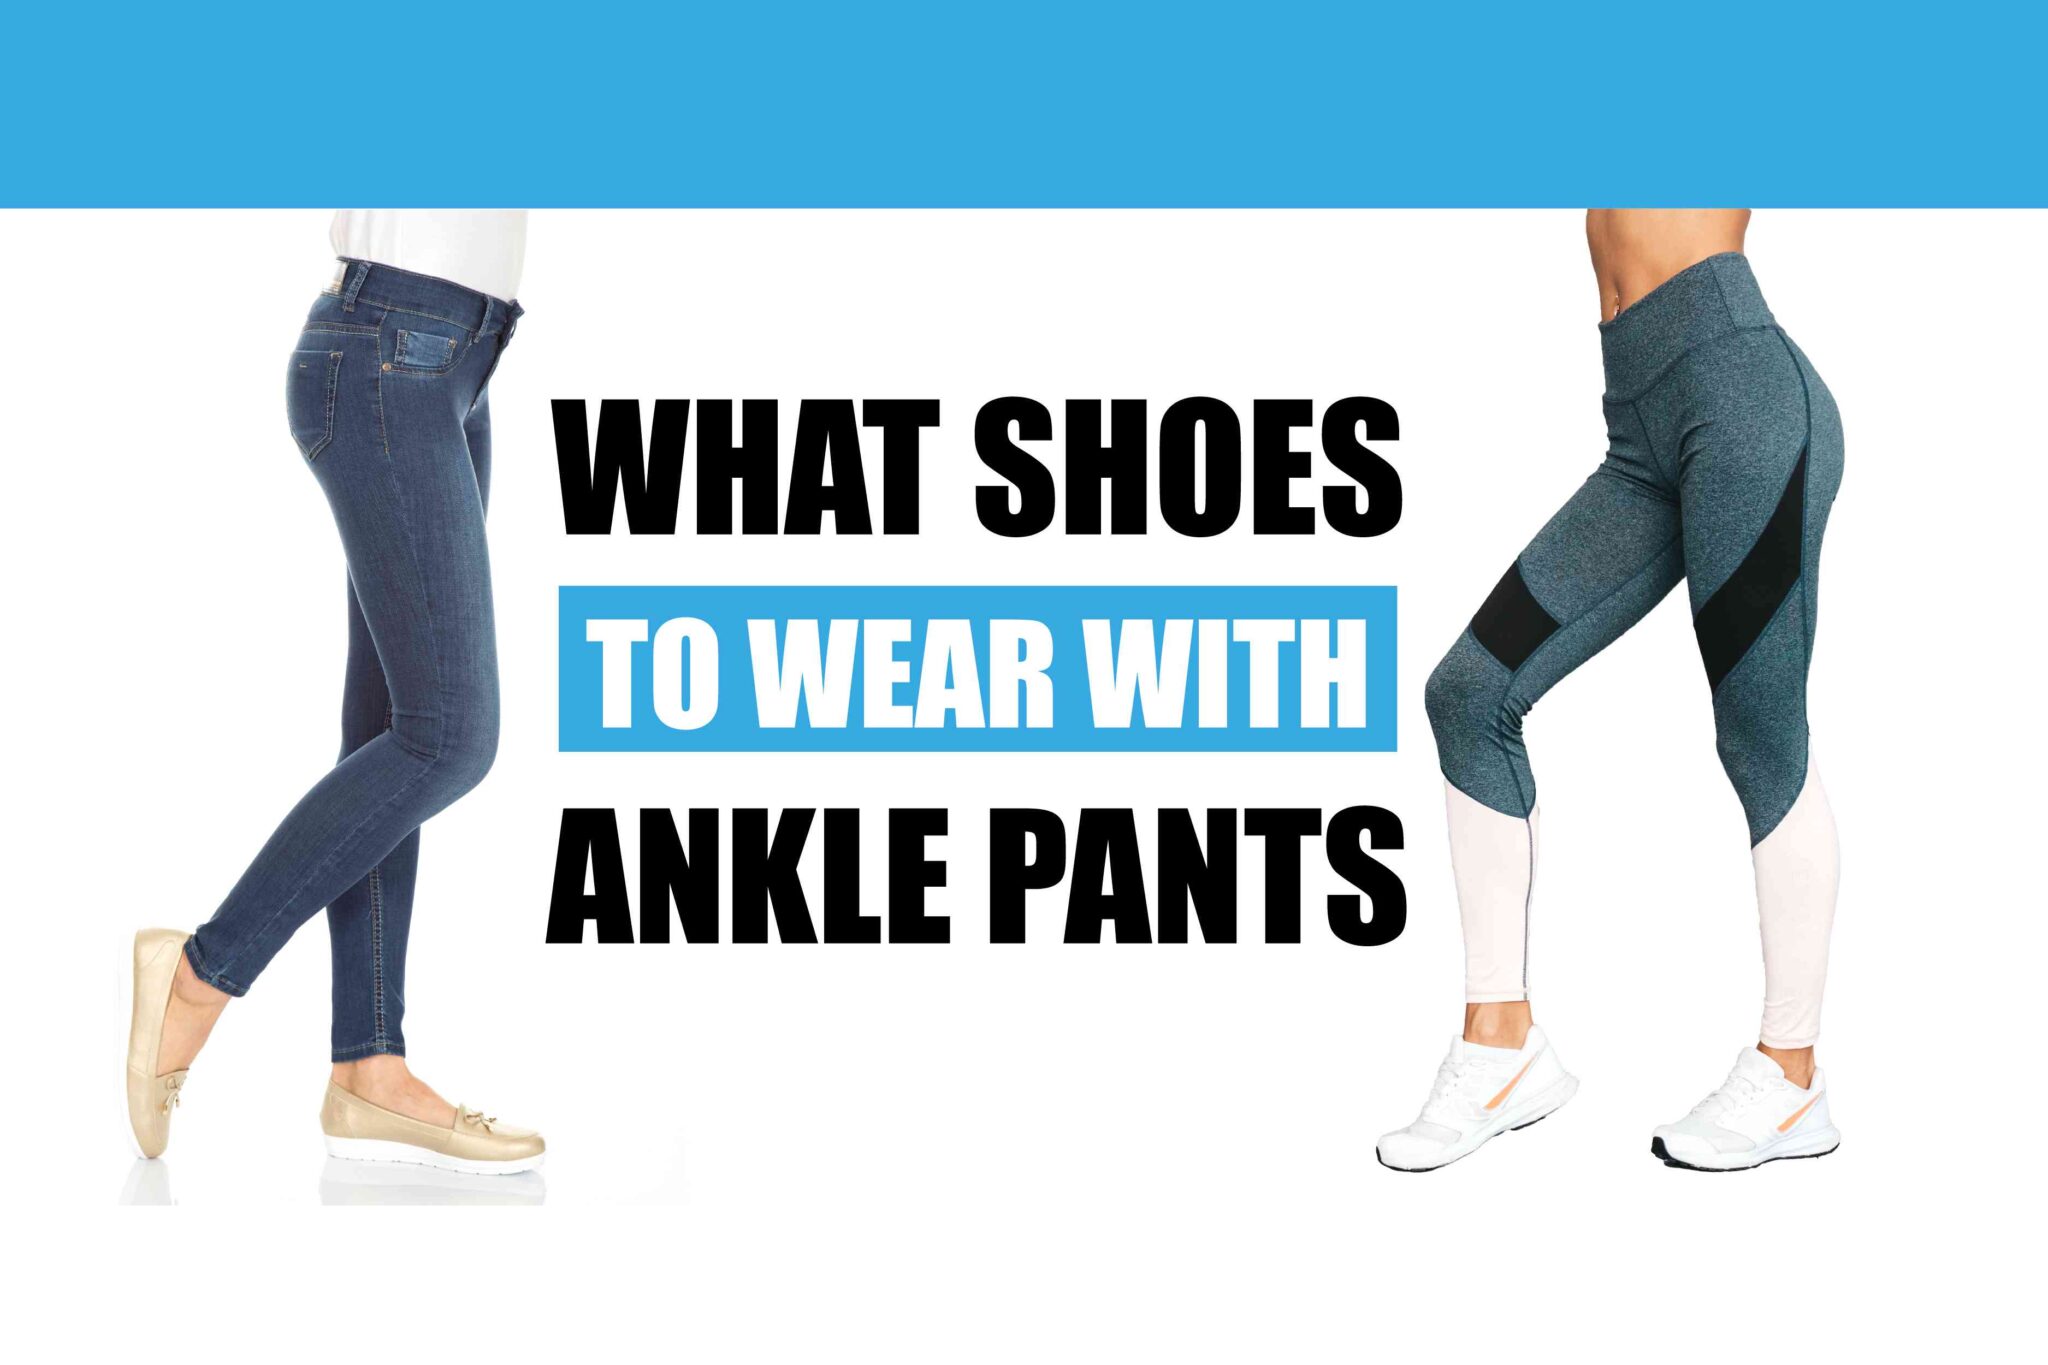 What Shoes To Wear With Ankle Pants: Complete Your Look - Symboli Mag